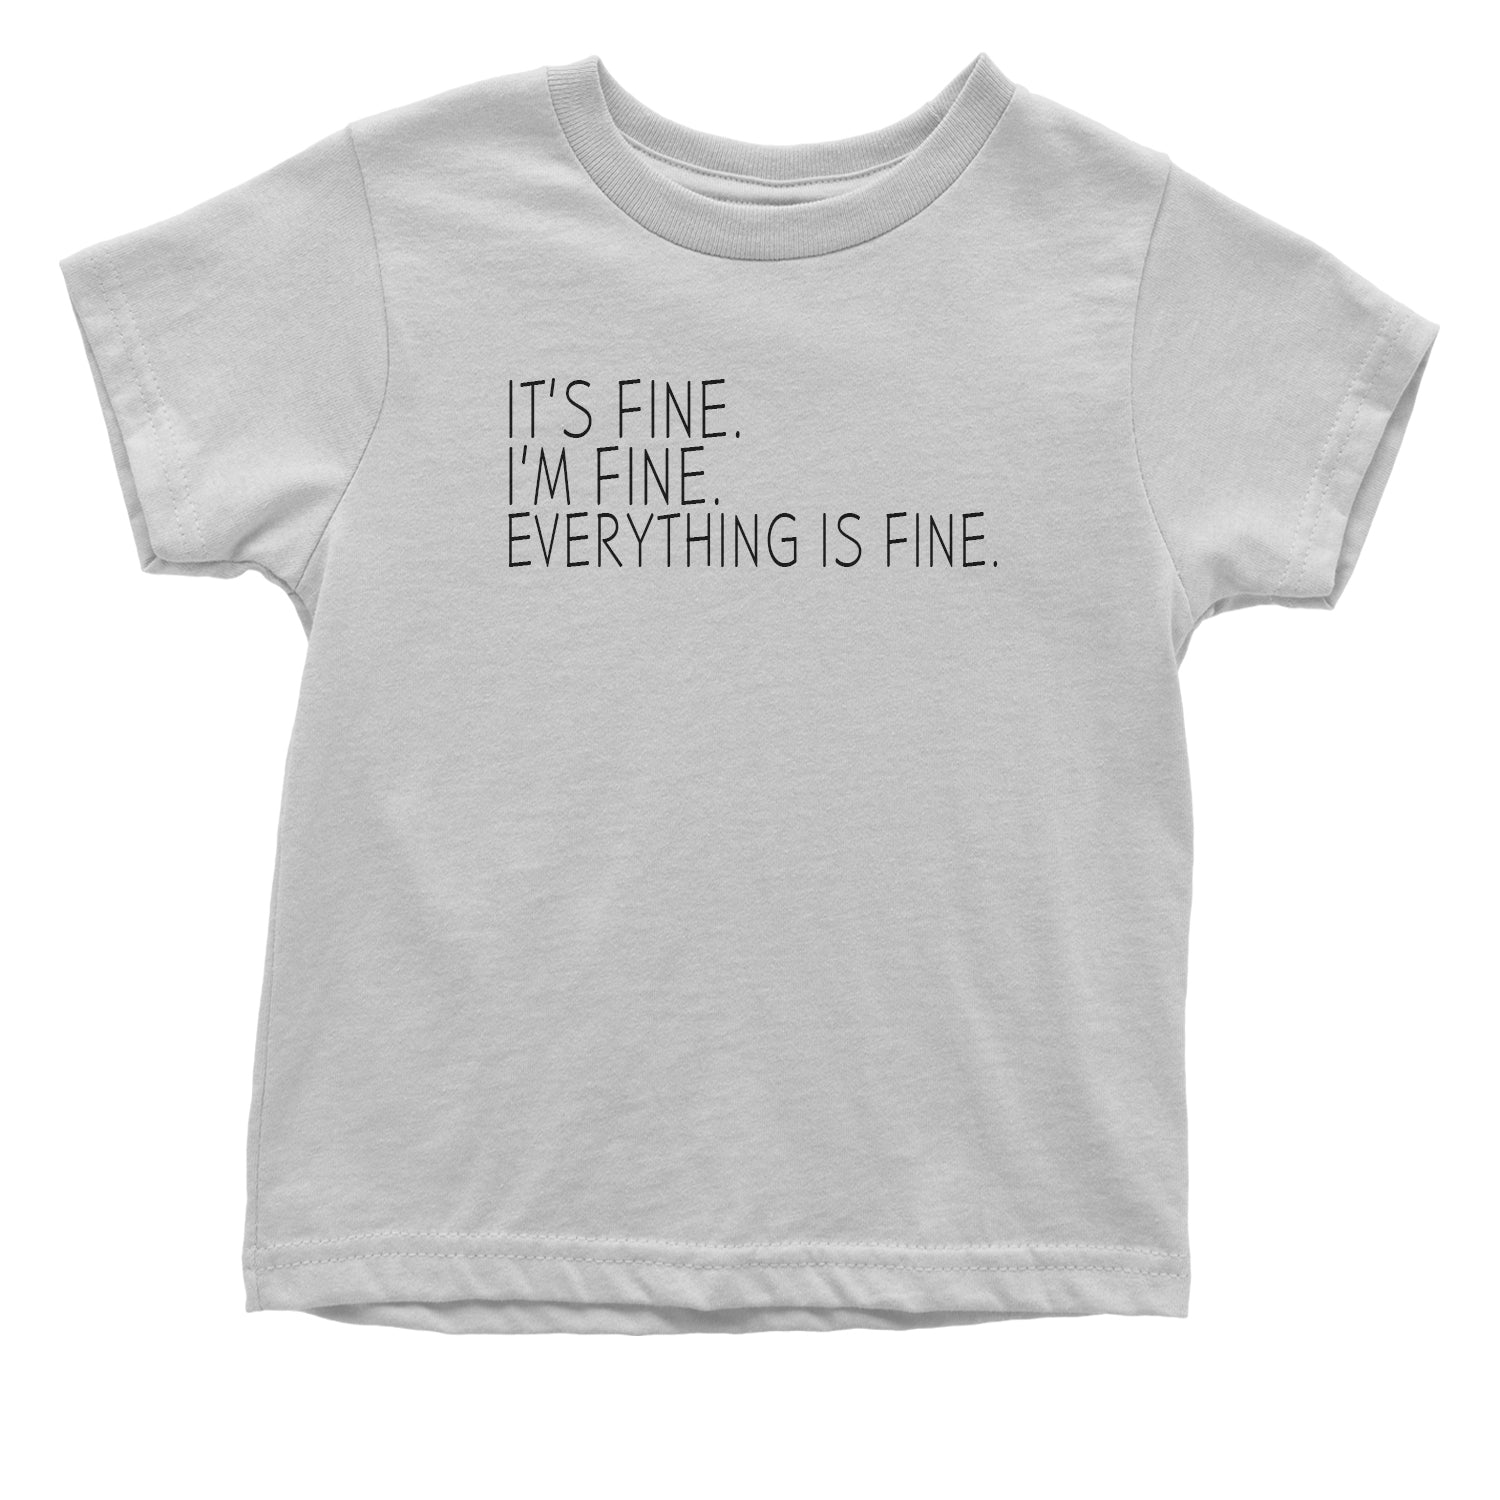 It's Fine. I'm Fine. Everything Is Fine. Toddler T-Shirt quarantine, survivor by Expression Tees